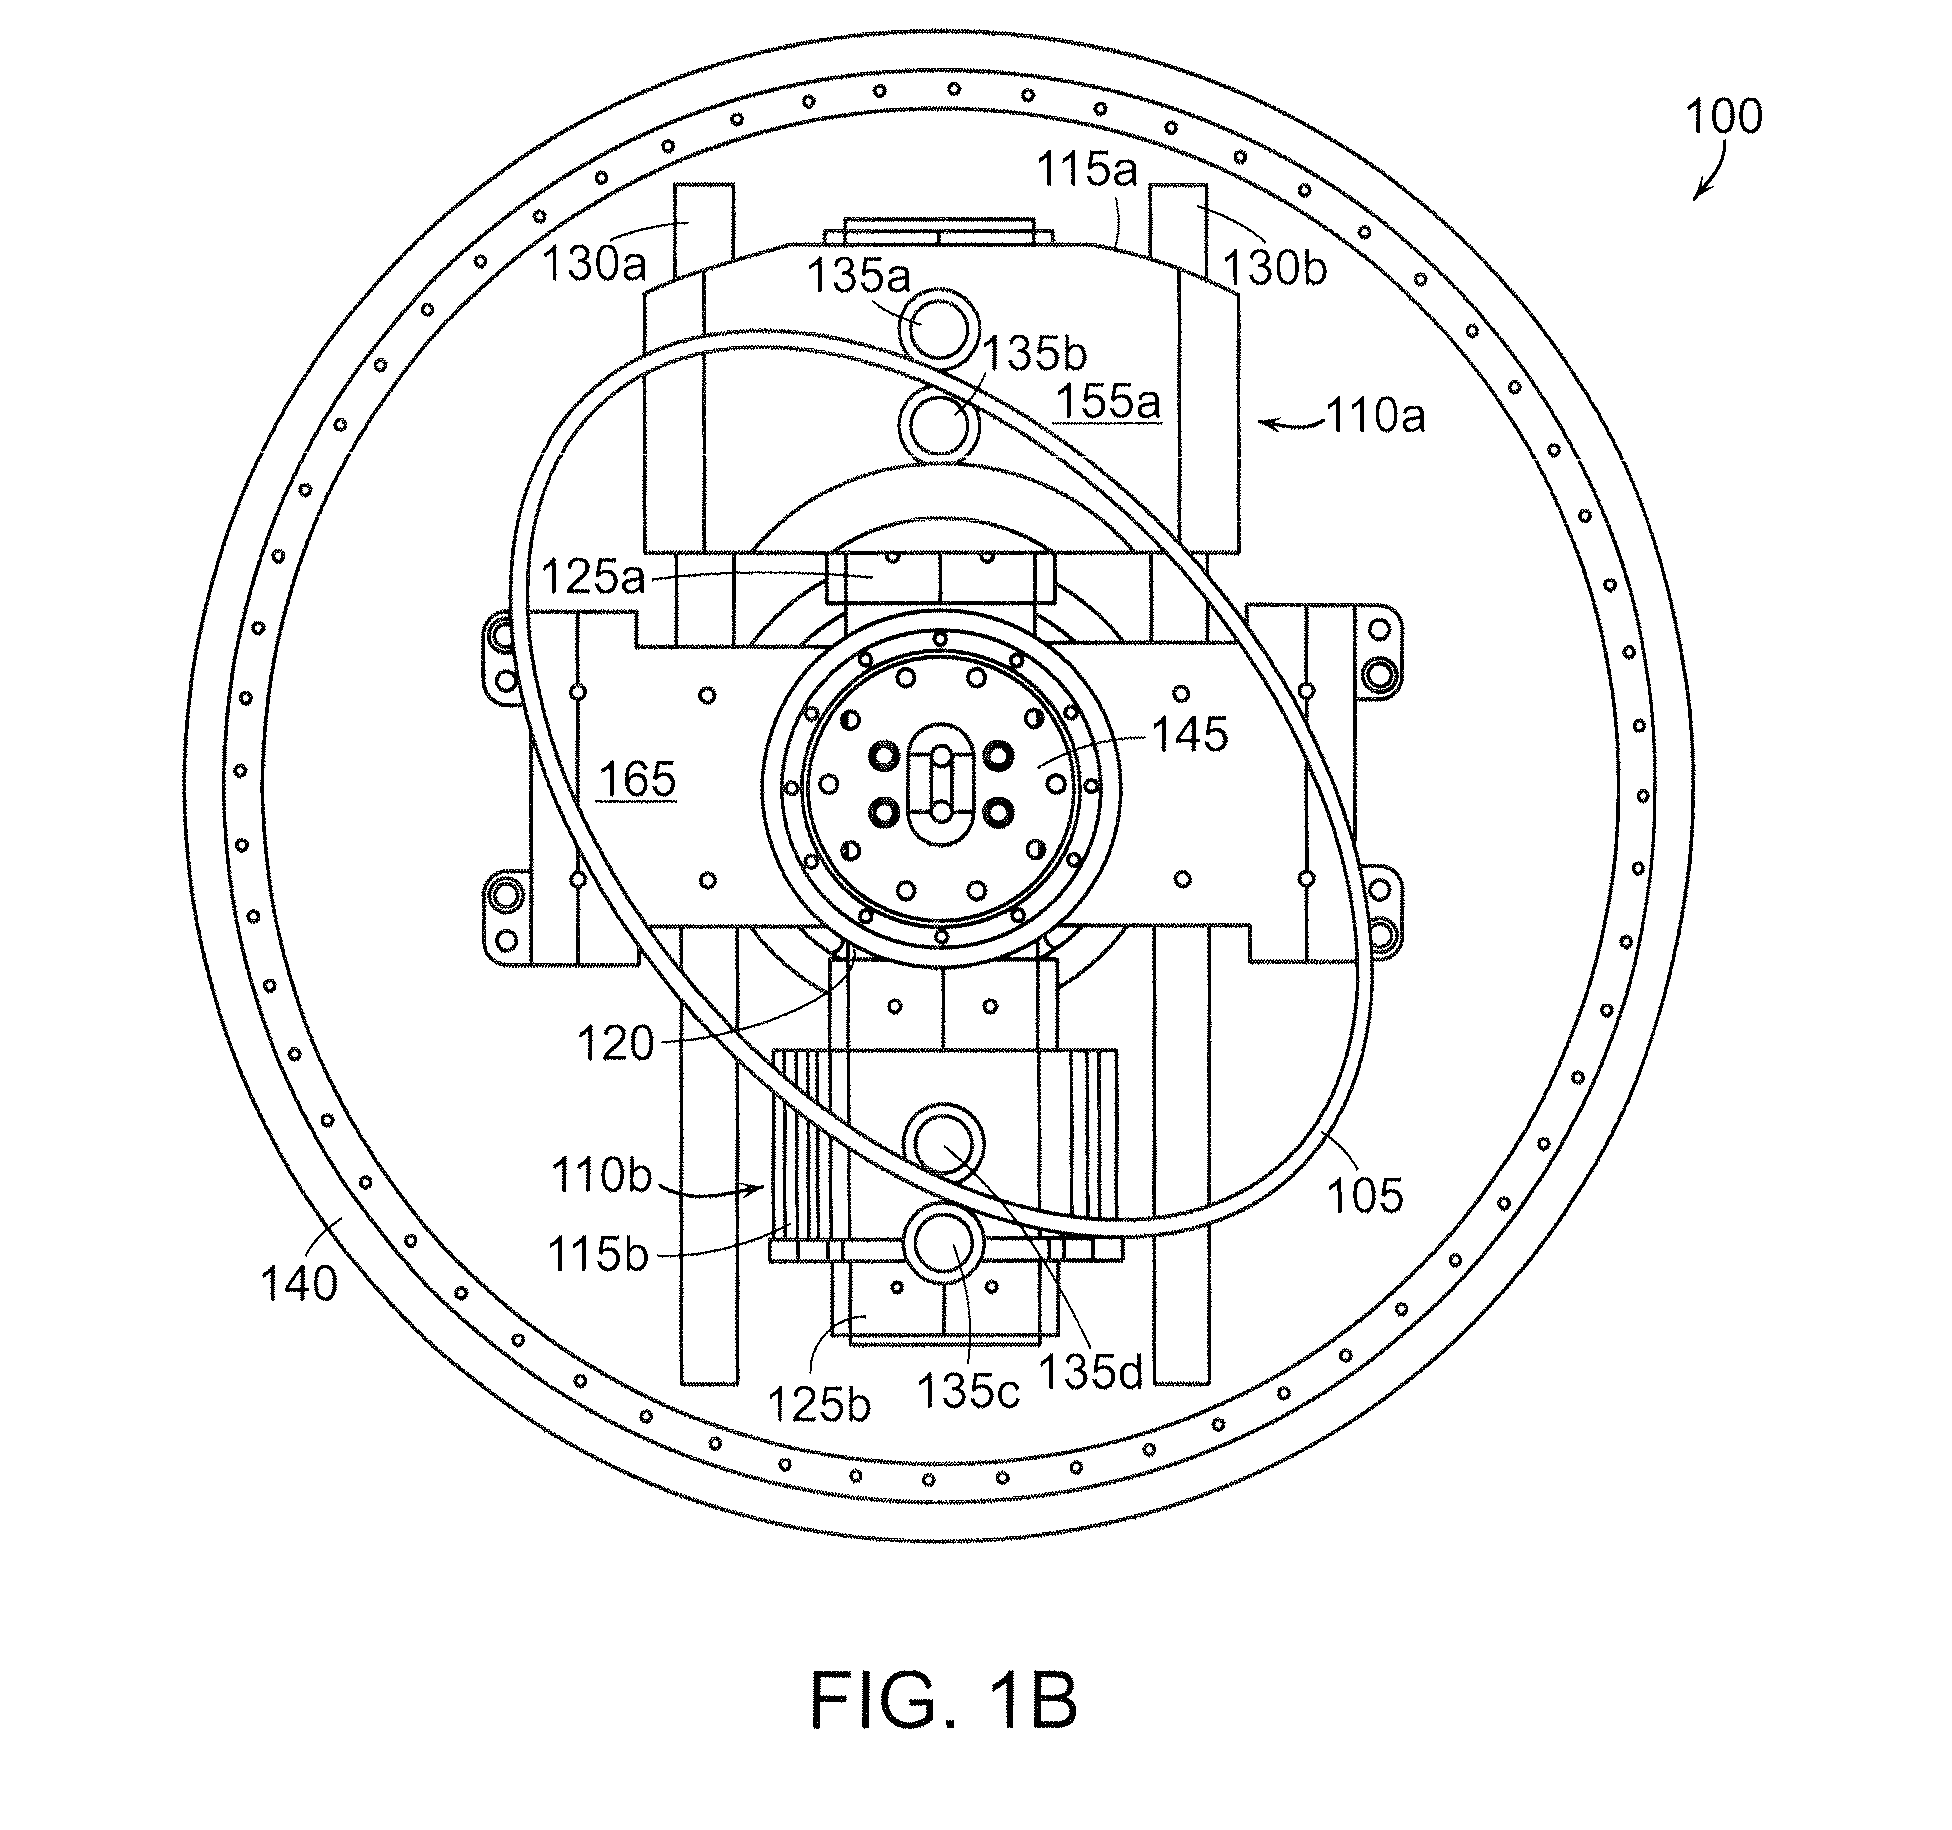 Linear electric machine with linear-to-rotary converter